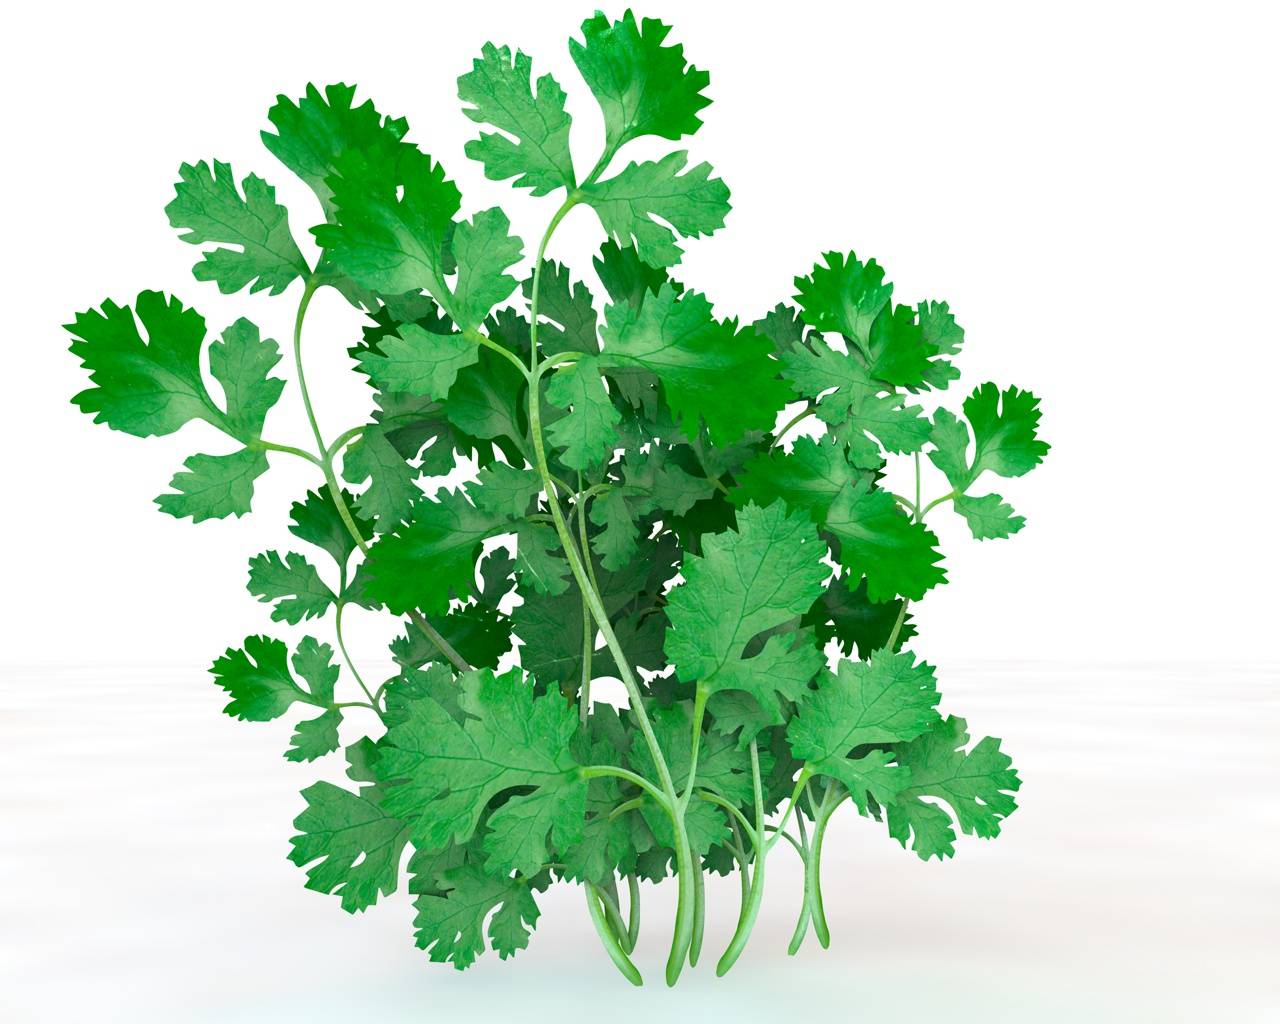 Coriander Photos, Download The BEST Free Coriander Stock Photos & HD Images